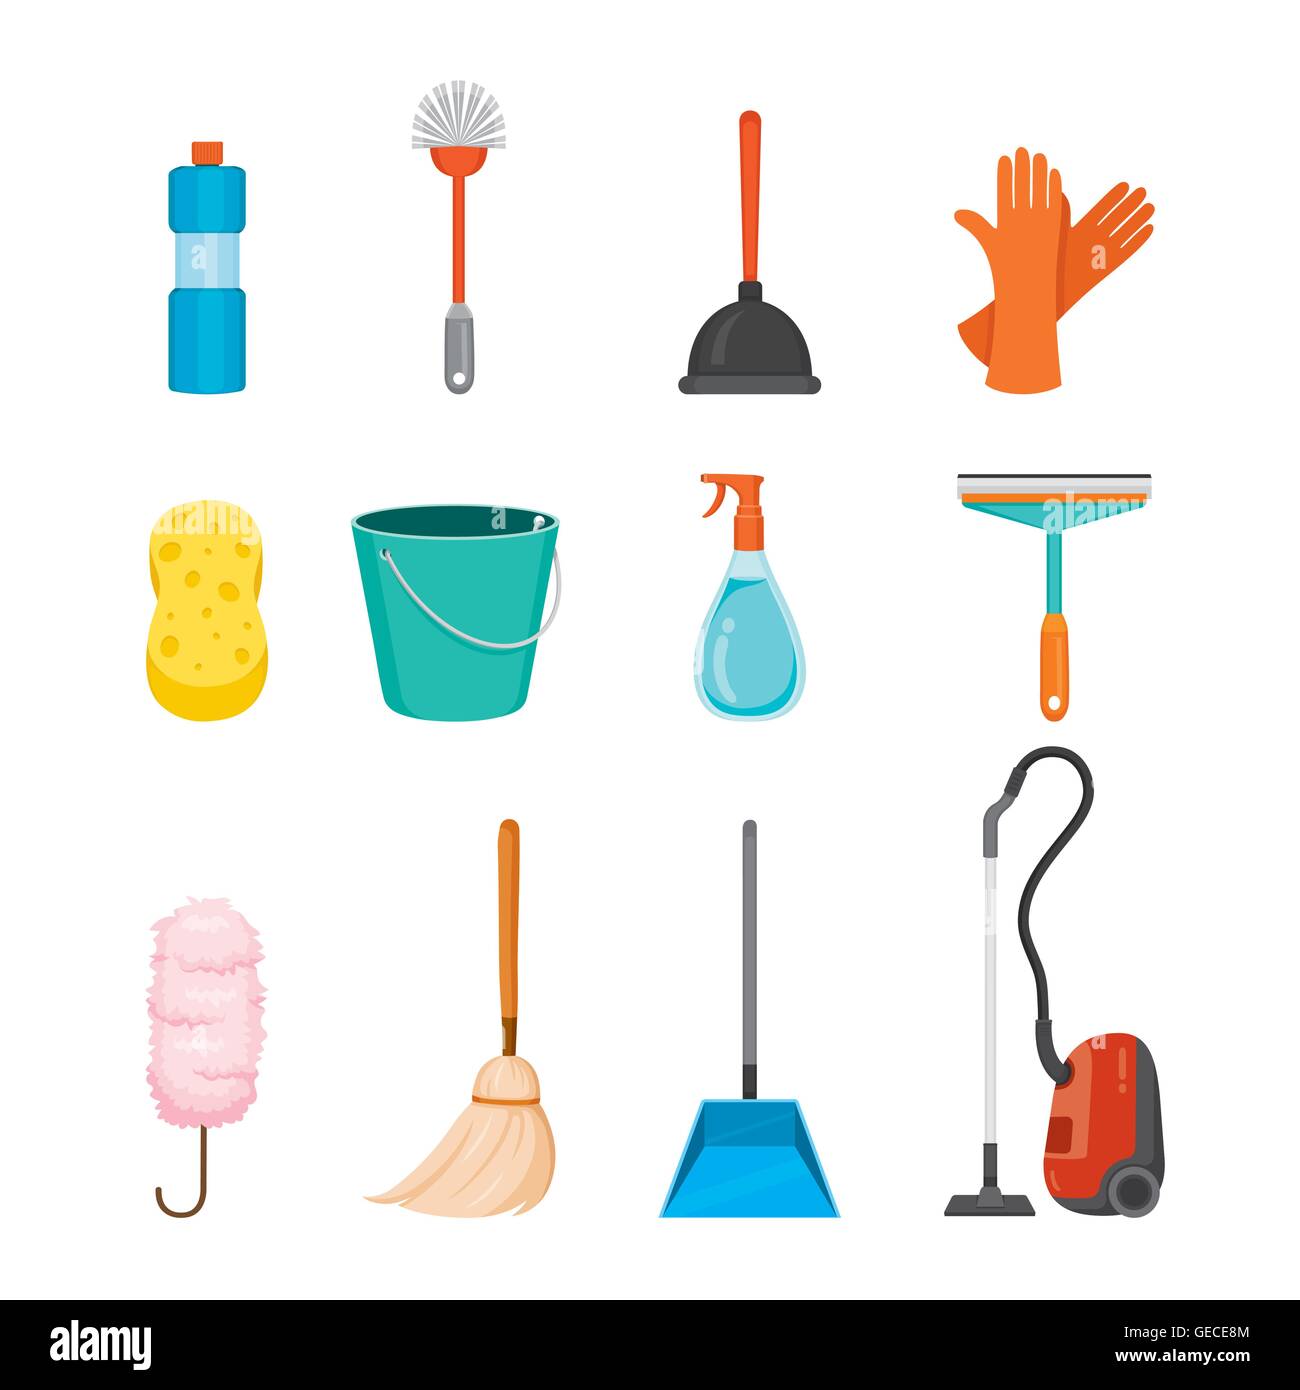 Household item and cleaning supply icon set Vector Image